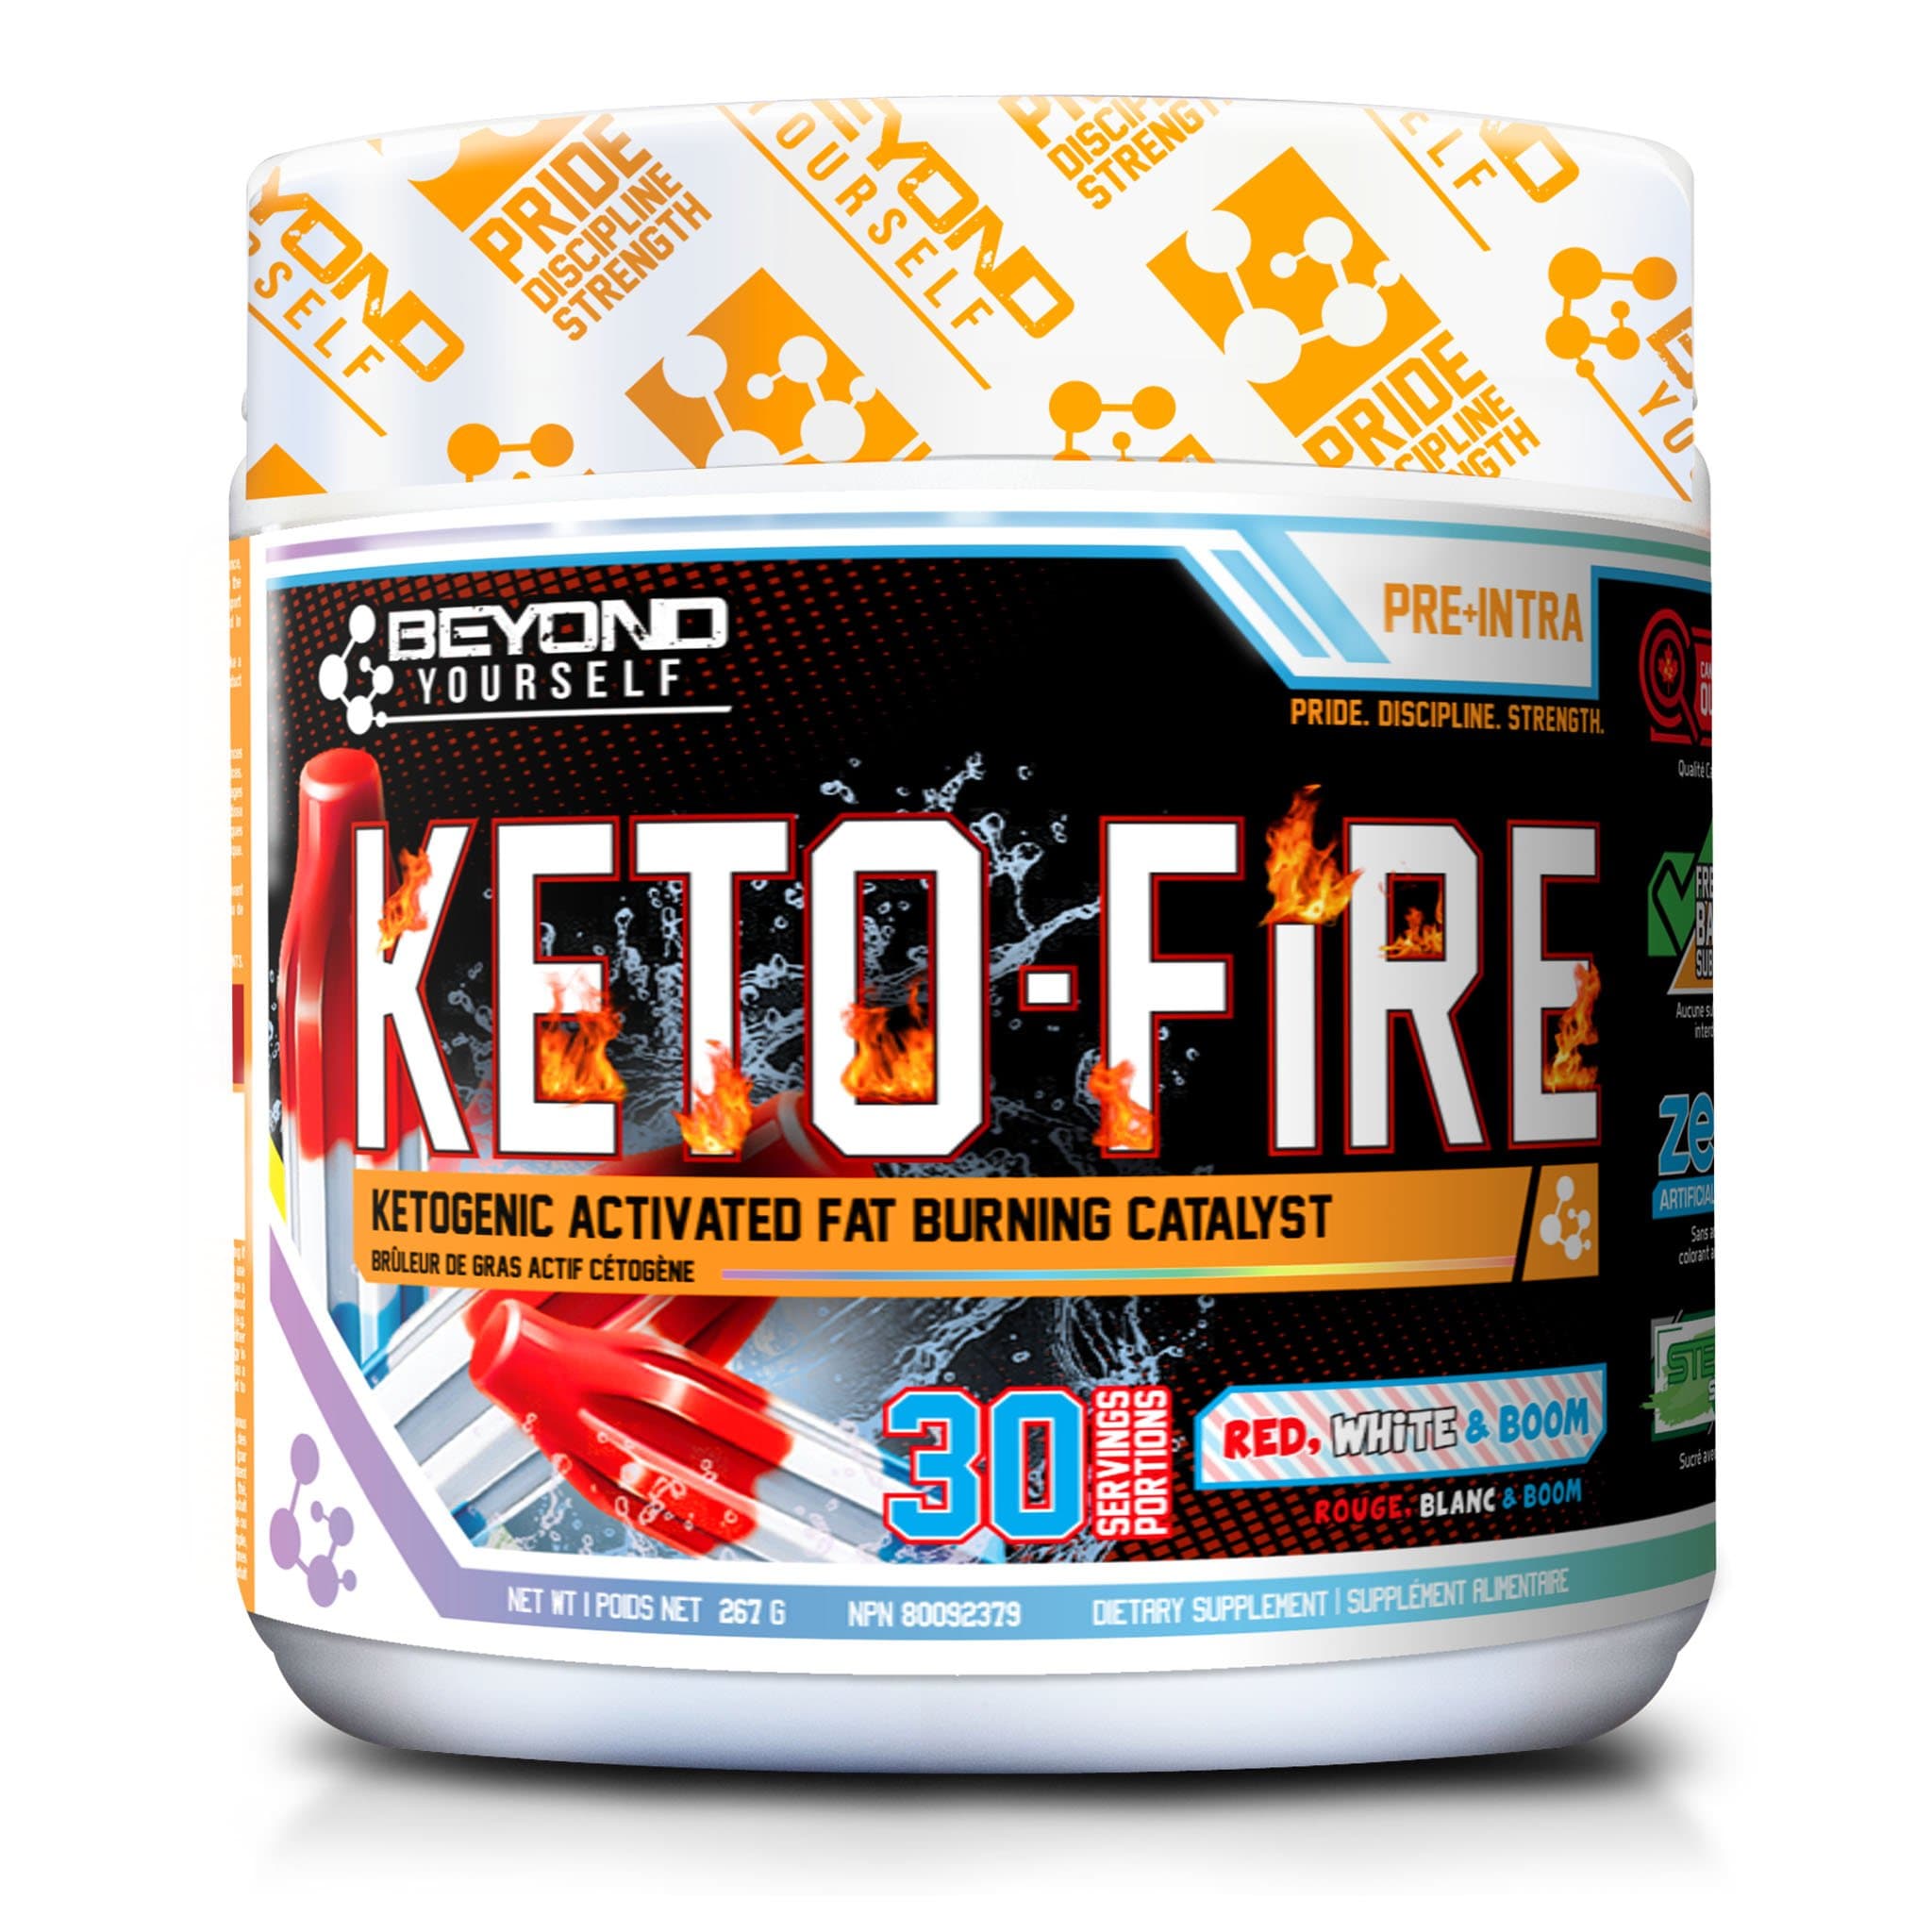 Beyond Yourself Keto-Fire 267g | HERC'S Nutrition Canada